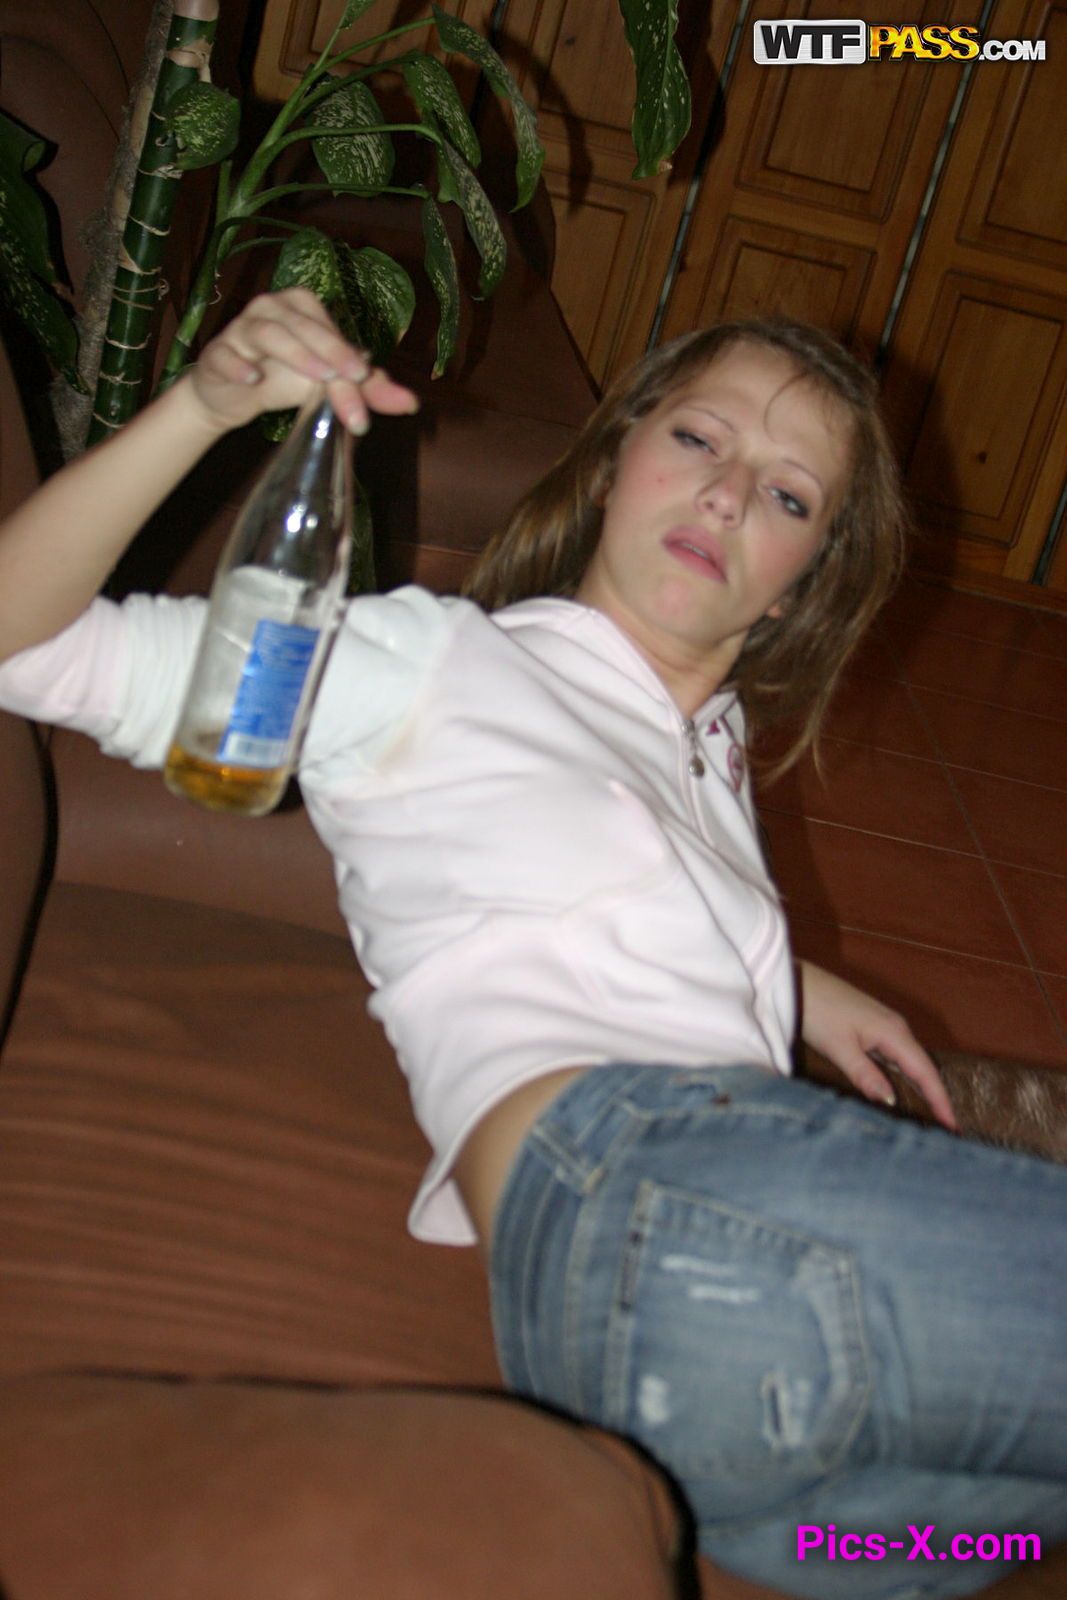 Weekend bash with sexy college chicks, part 3 - College Fuck Parties - Image 10